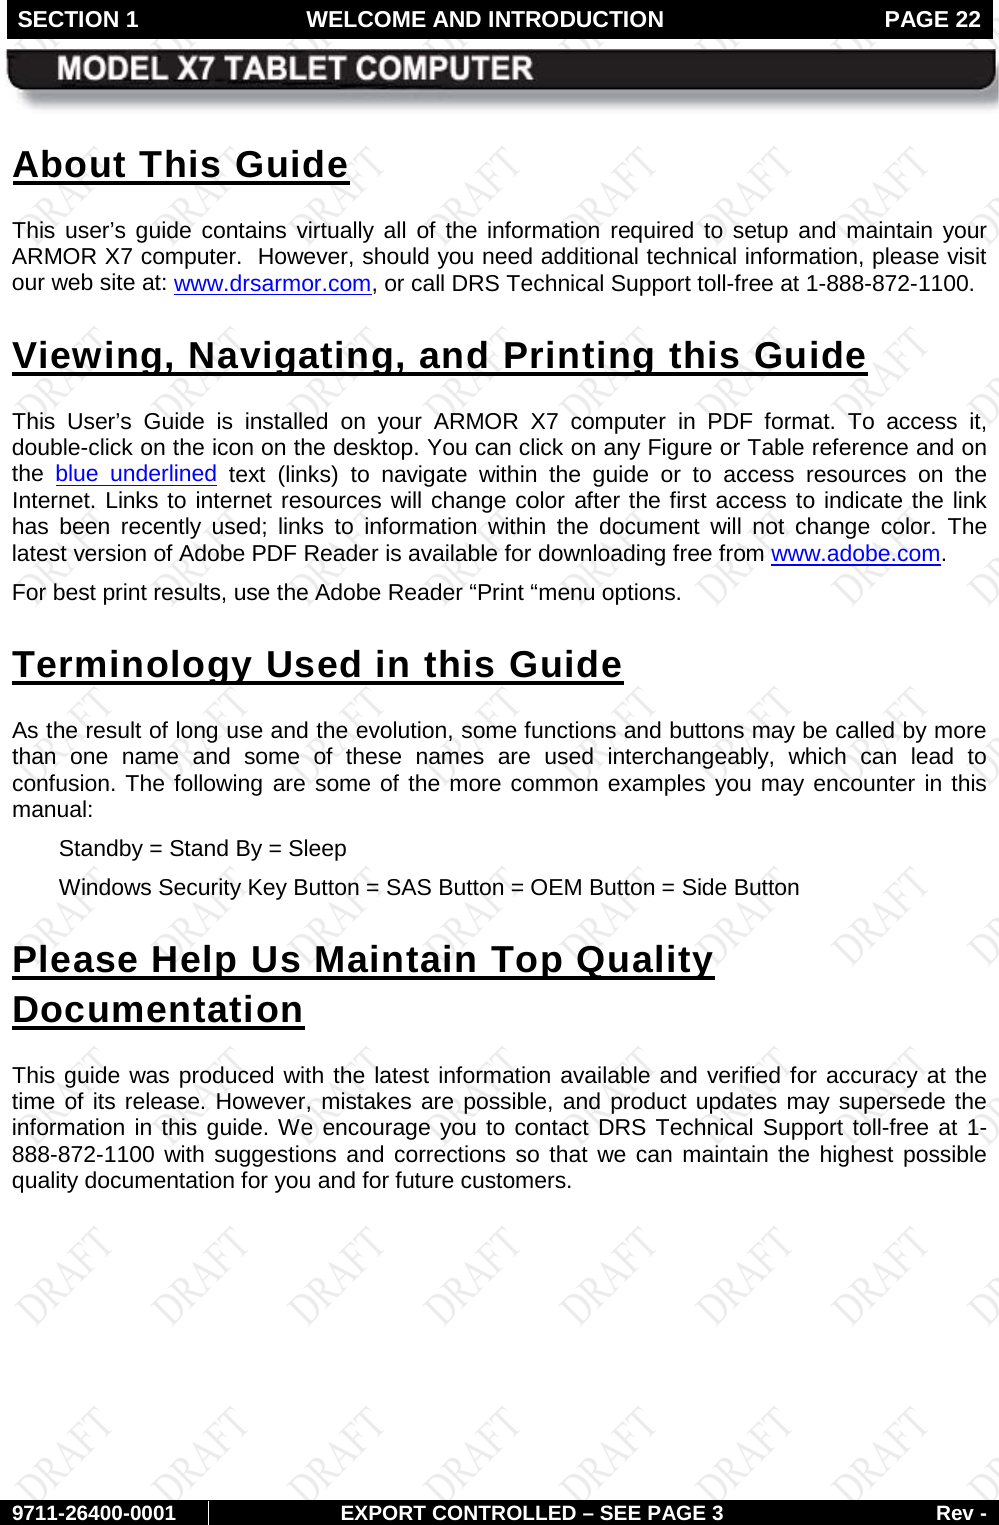 SECTION 1 WELCOME AND INTRODUCTION  PAGE 22        9711-26400-0001 EXPORT CONTROLLED – SEE PAGE 3 Rev - About This Guide This  user’s guide contains virtually all of the information  required to setup and maintain your ARMOR X7 computer.  However, should you need additional technical information, please visit our web site at: www.drsarmor.com, or call DRS Technical Support toll-free at 1-888-872-1100.  Viewing, Navigating, and Printing this Guide This User’s Guide is installed on your ARMOR X7 computer in PDF format. To access it, double-click on the icon on the desktop. You can click on any Figure or Table reference and on the blue underlined text (links) to navigate within the guide  or  to access resources on the Internet. Links to internet resources will change color after the first access to indicate the link has been recently used; links to information within the document will not change color. The latest version of Adobe PDF Reader is available for downloading free from www.adobe.com.  For best print results, use the Adobe Reader “Print “menu options. Terminology Used in this Guide As the result of long use and the evolution, some functions and buttons may be called by more than one name and some of these names are used interchangeably, which can lead to confusion. The following are some of the more common examples you may encounter in this manual:  Standby = Stand By = Sleep  Windows Security Key Button = SAS Button = OEM Button = Side Button  Please Help Us Maintain Top Quality Documentation This guide was produced with the latest information available and verified for accuracy at the time of its release. However, mistakes are possible, and product updates may supersede the information in this guide. We encourage you to contact DRS Technical Support toll-free at 1-888-872-1100 with suggestions and corrections so that we can maintain the highest possible quality documentation for you and for future customers.   